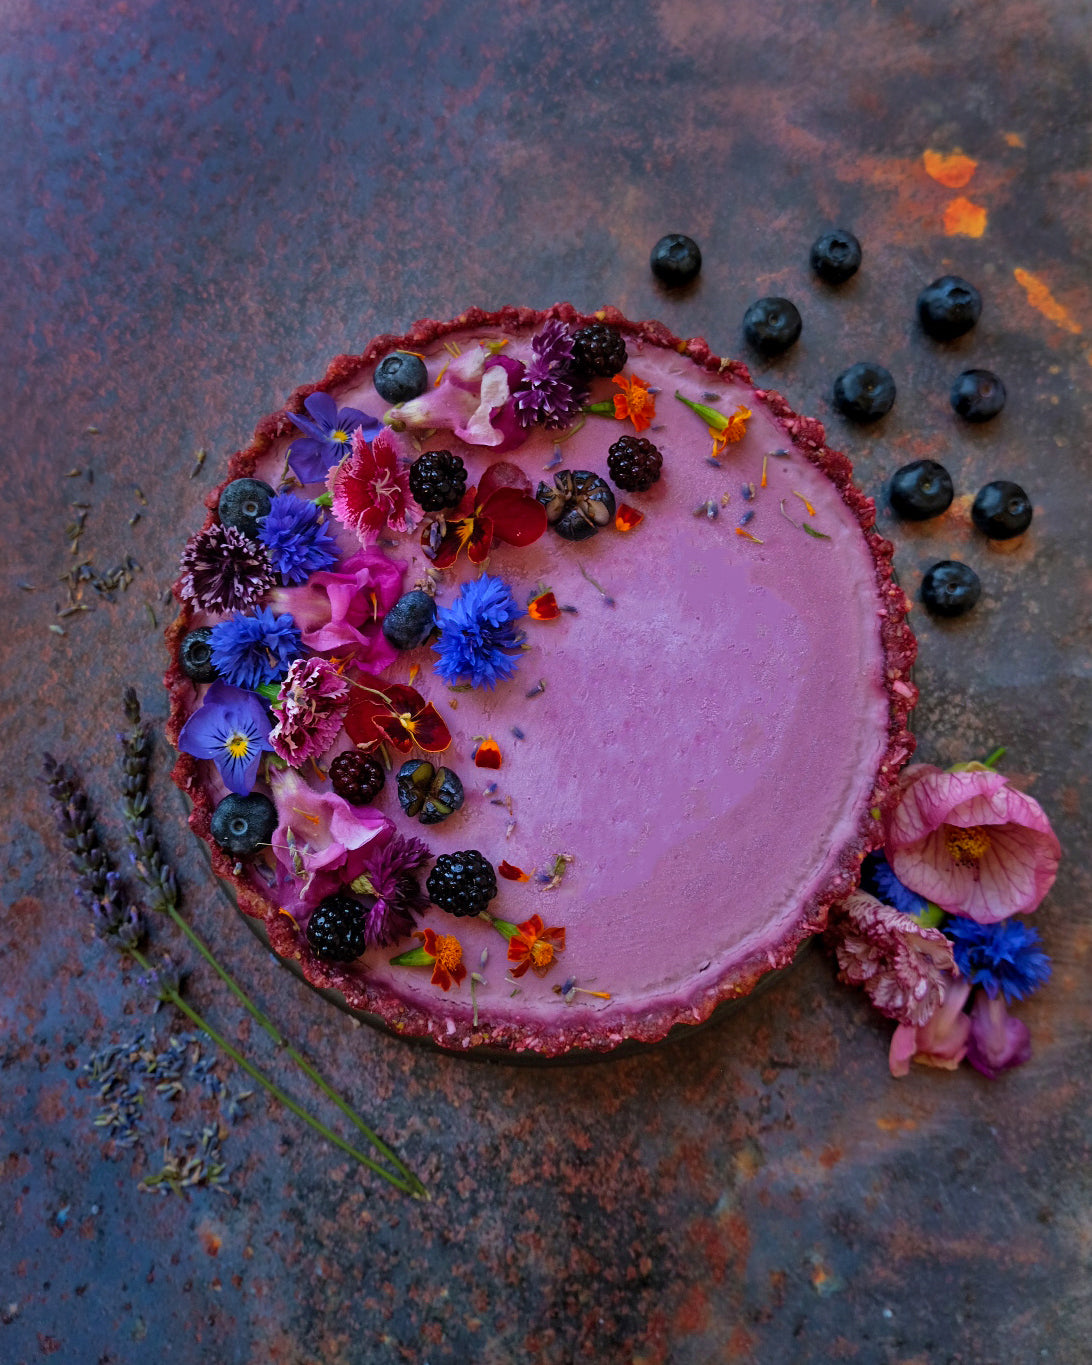 vegan antioxidant boosted foraged berry tart with edible flowers, a healthy dessert